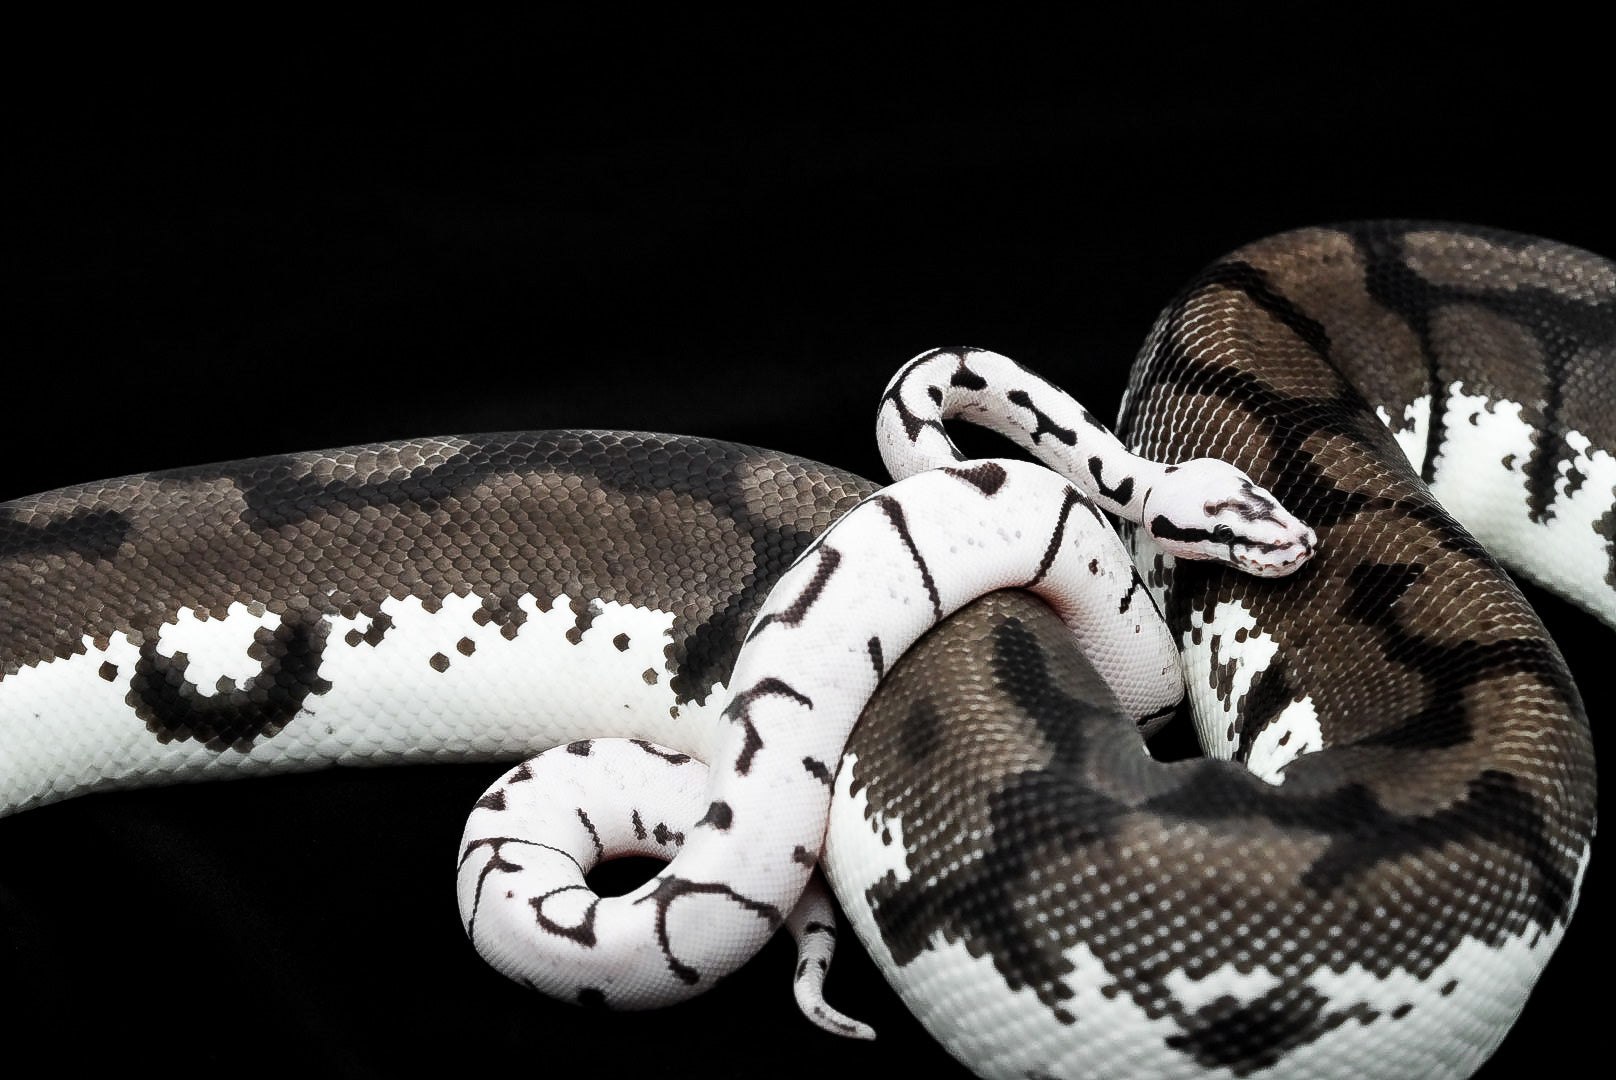 Essential Tips for Feeding Your Ball Python